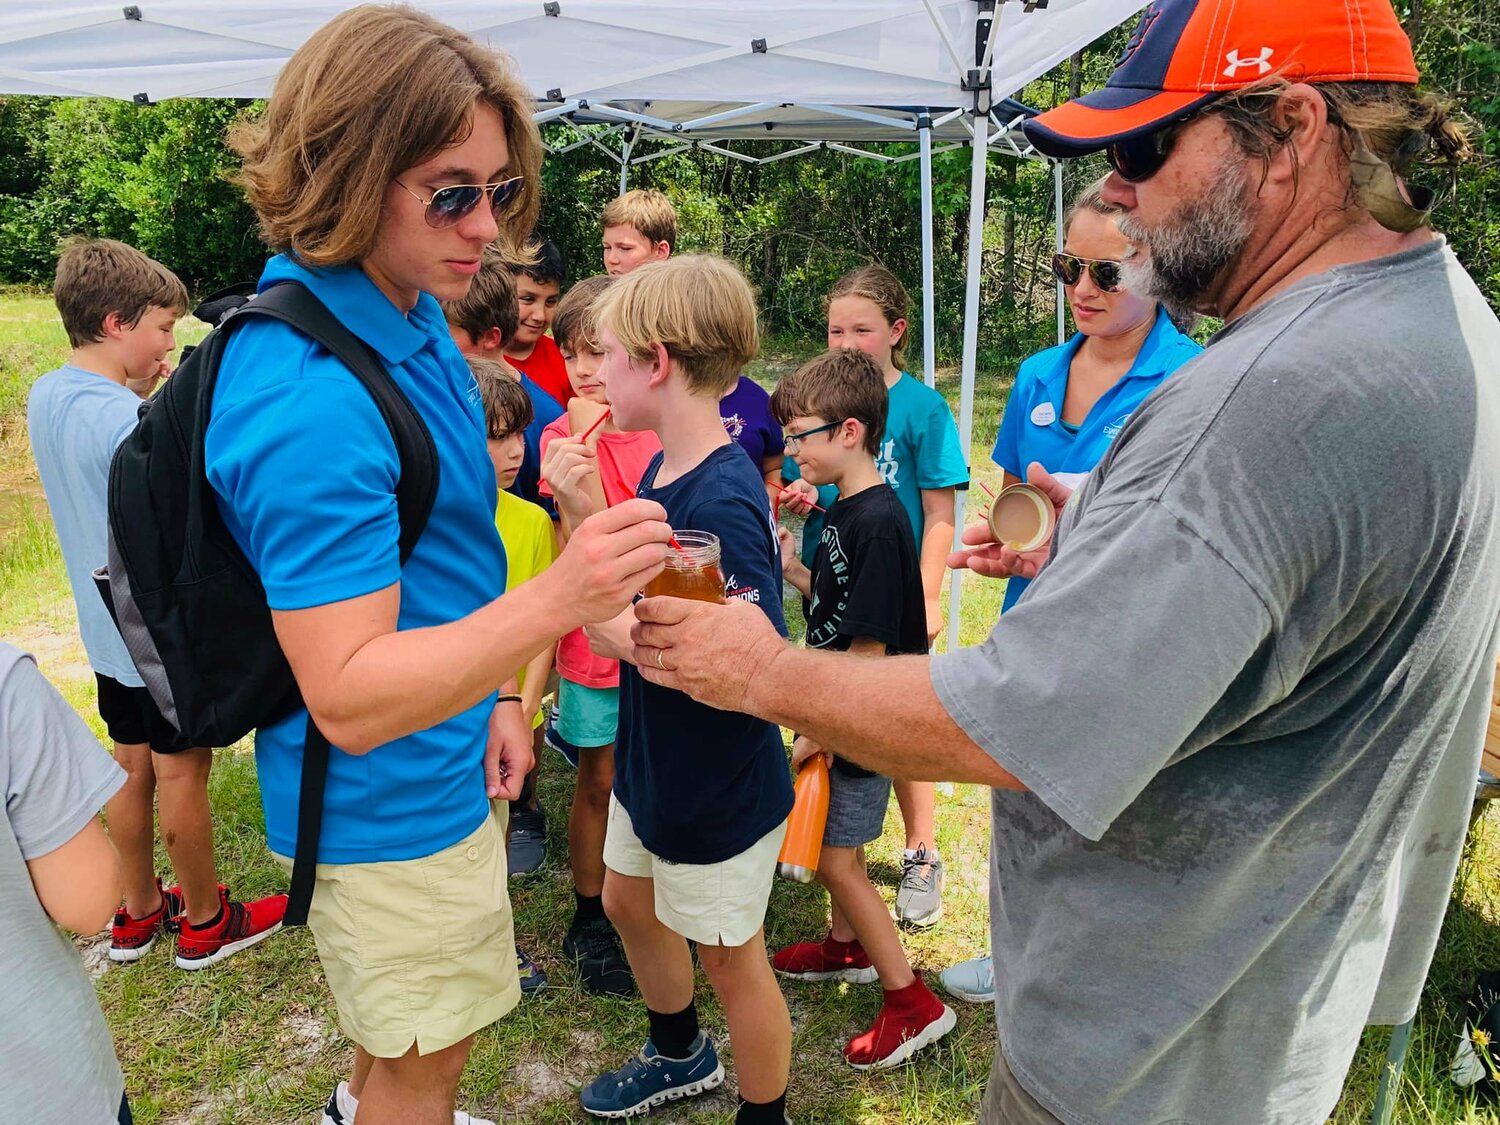 Christ Litton (right) offers an Expect Excellence counselor a sample of honey during an Expect Excellence summer camp field trip. Litton show the children his bee hives located at Island Church and taught them about the process.